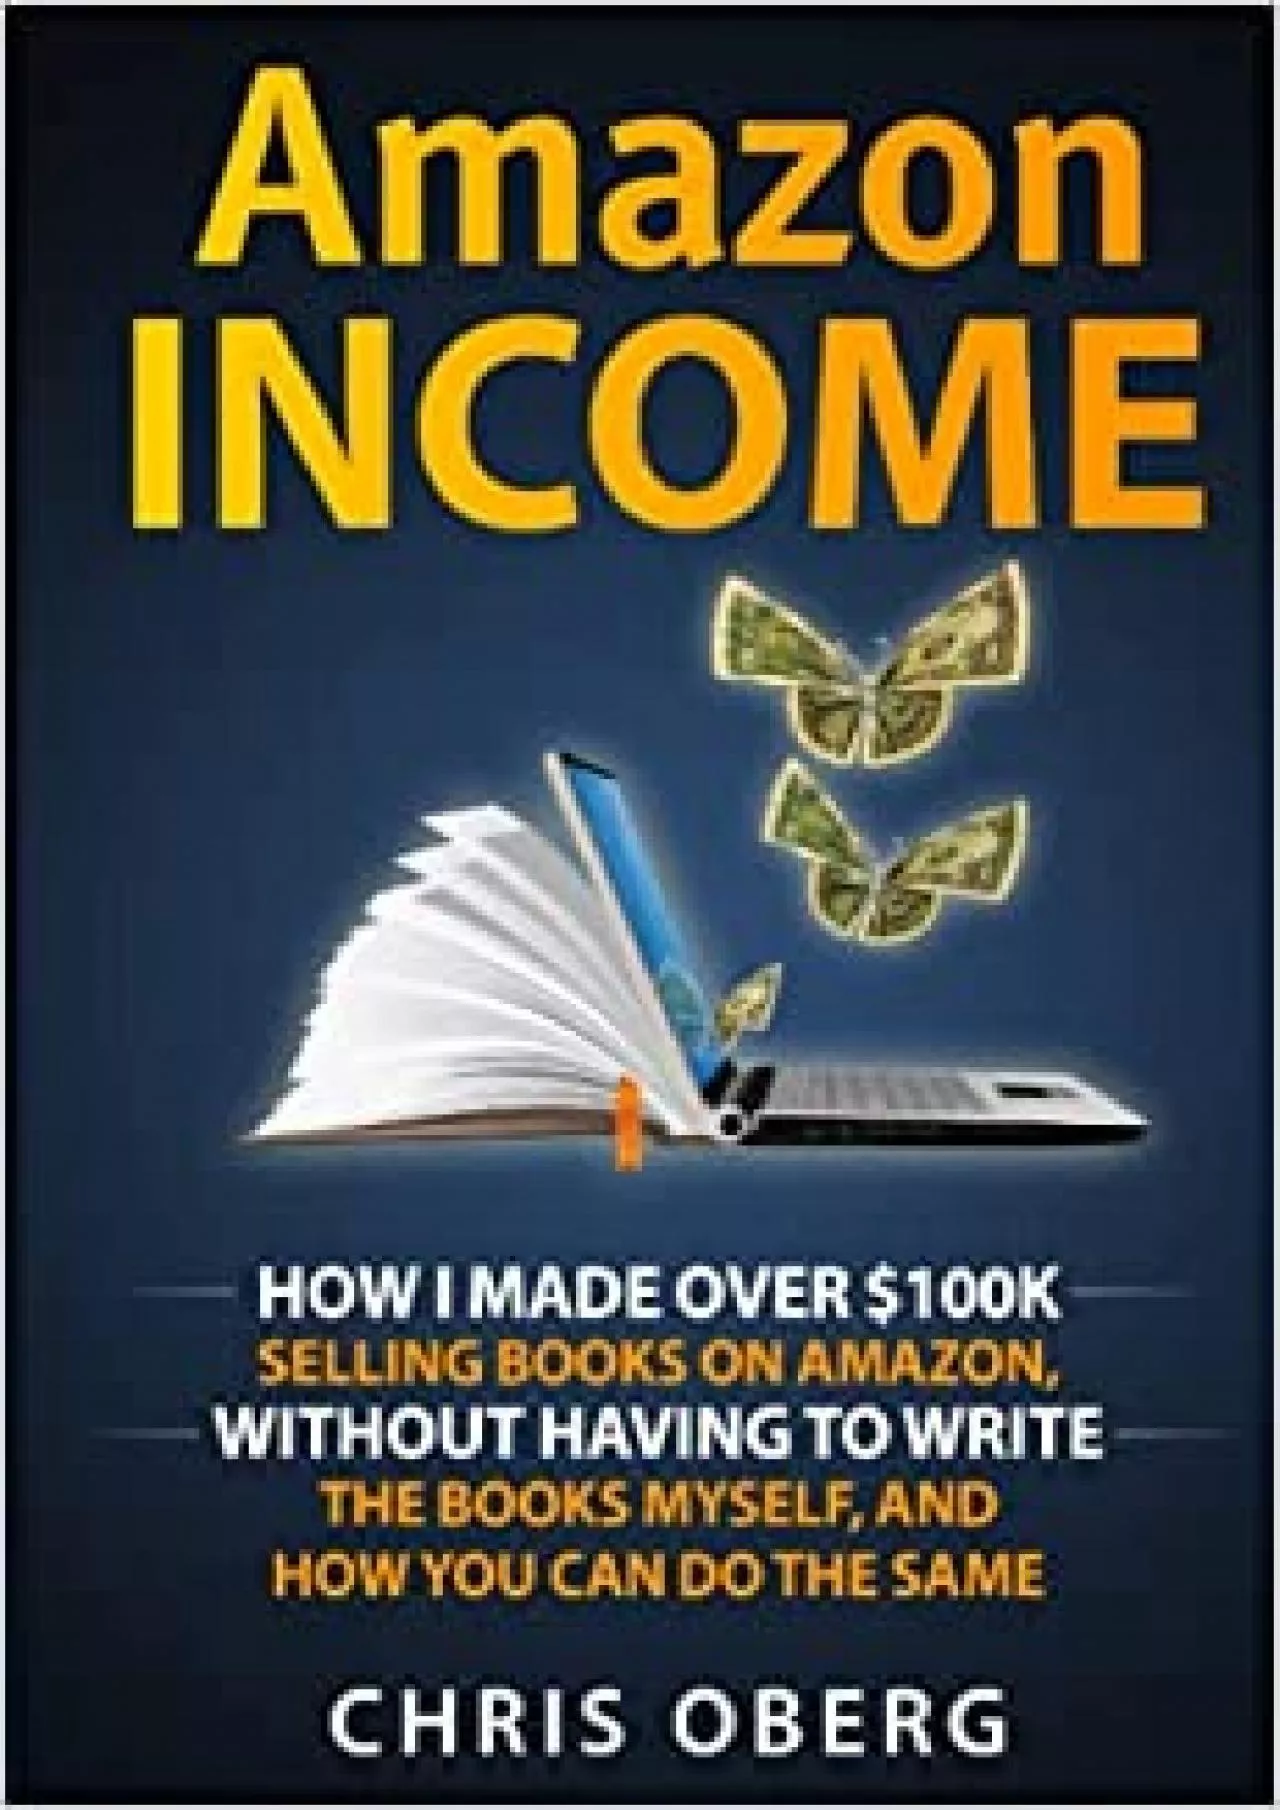 Amazon Income How I Made Over 100K Selling Books On Amazon, Without Having To Write The